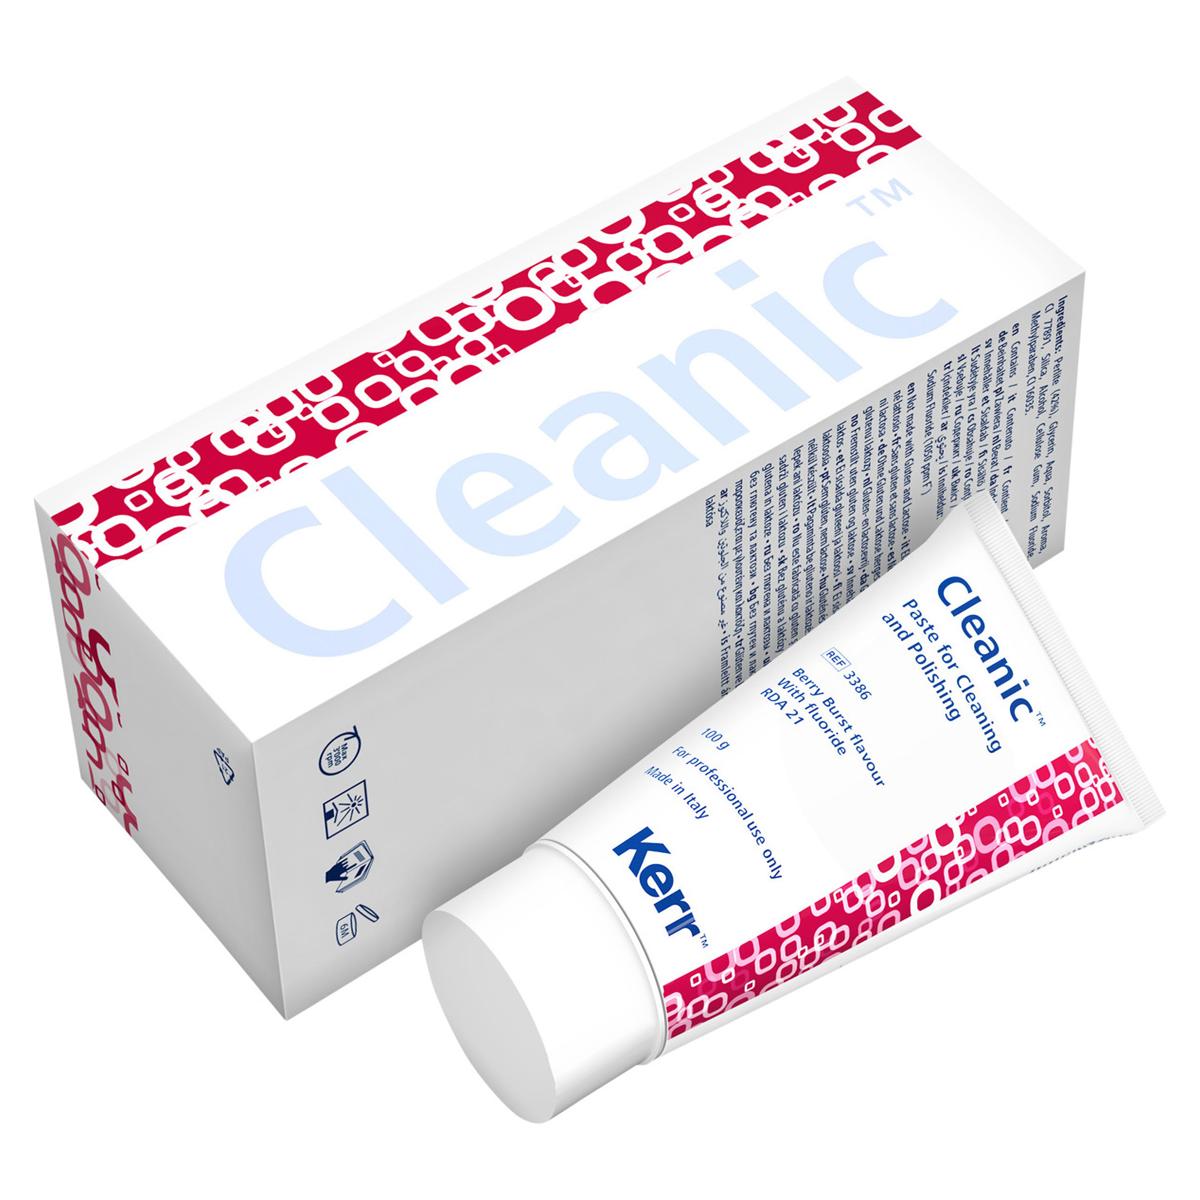 Cleanic in Tube avec fluorure - Baies rouges, Tube 100 g (REF. 3386)